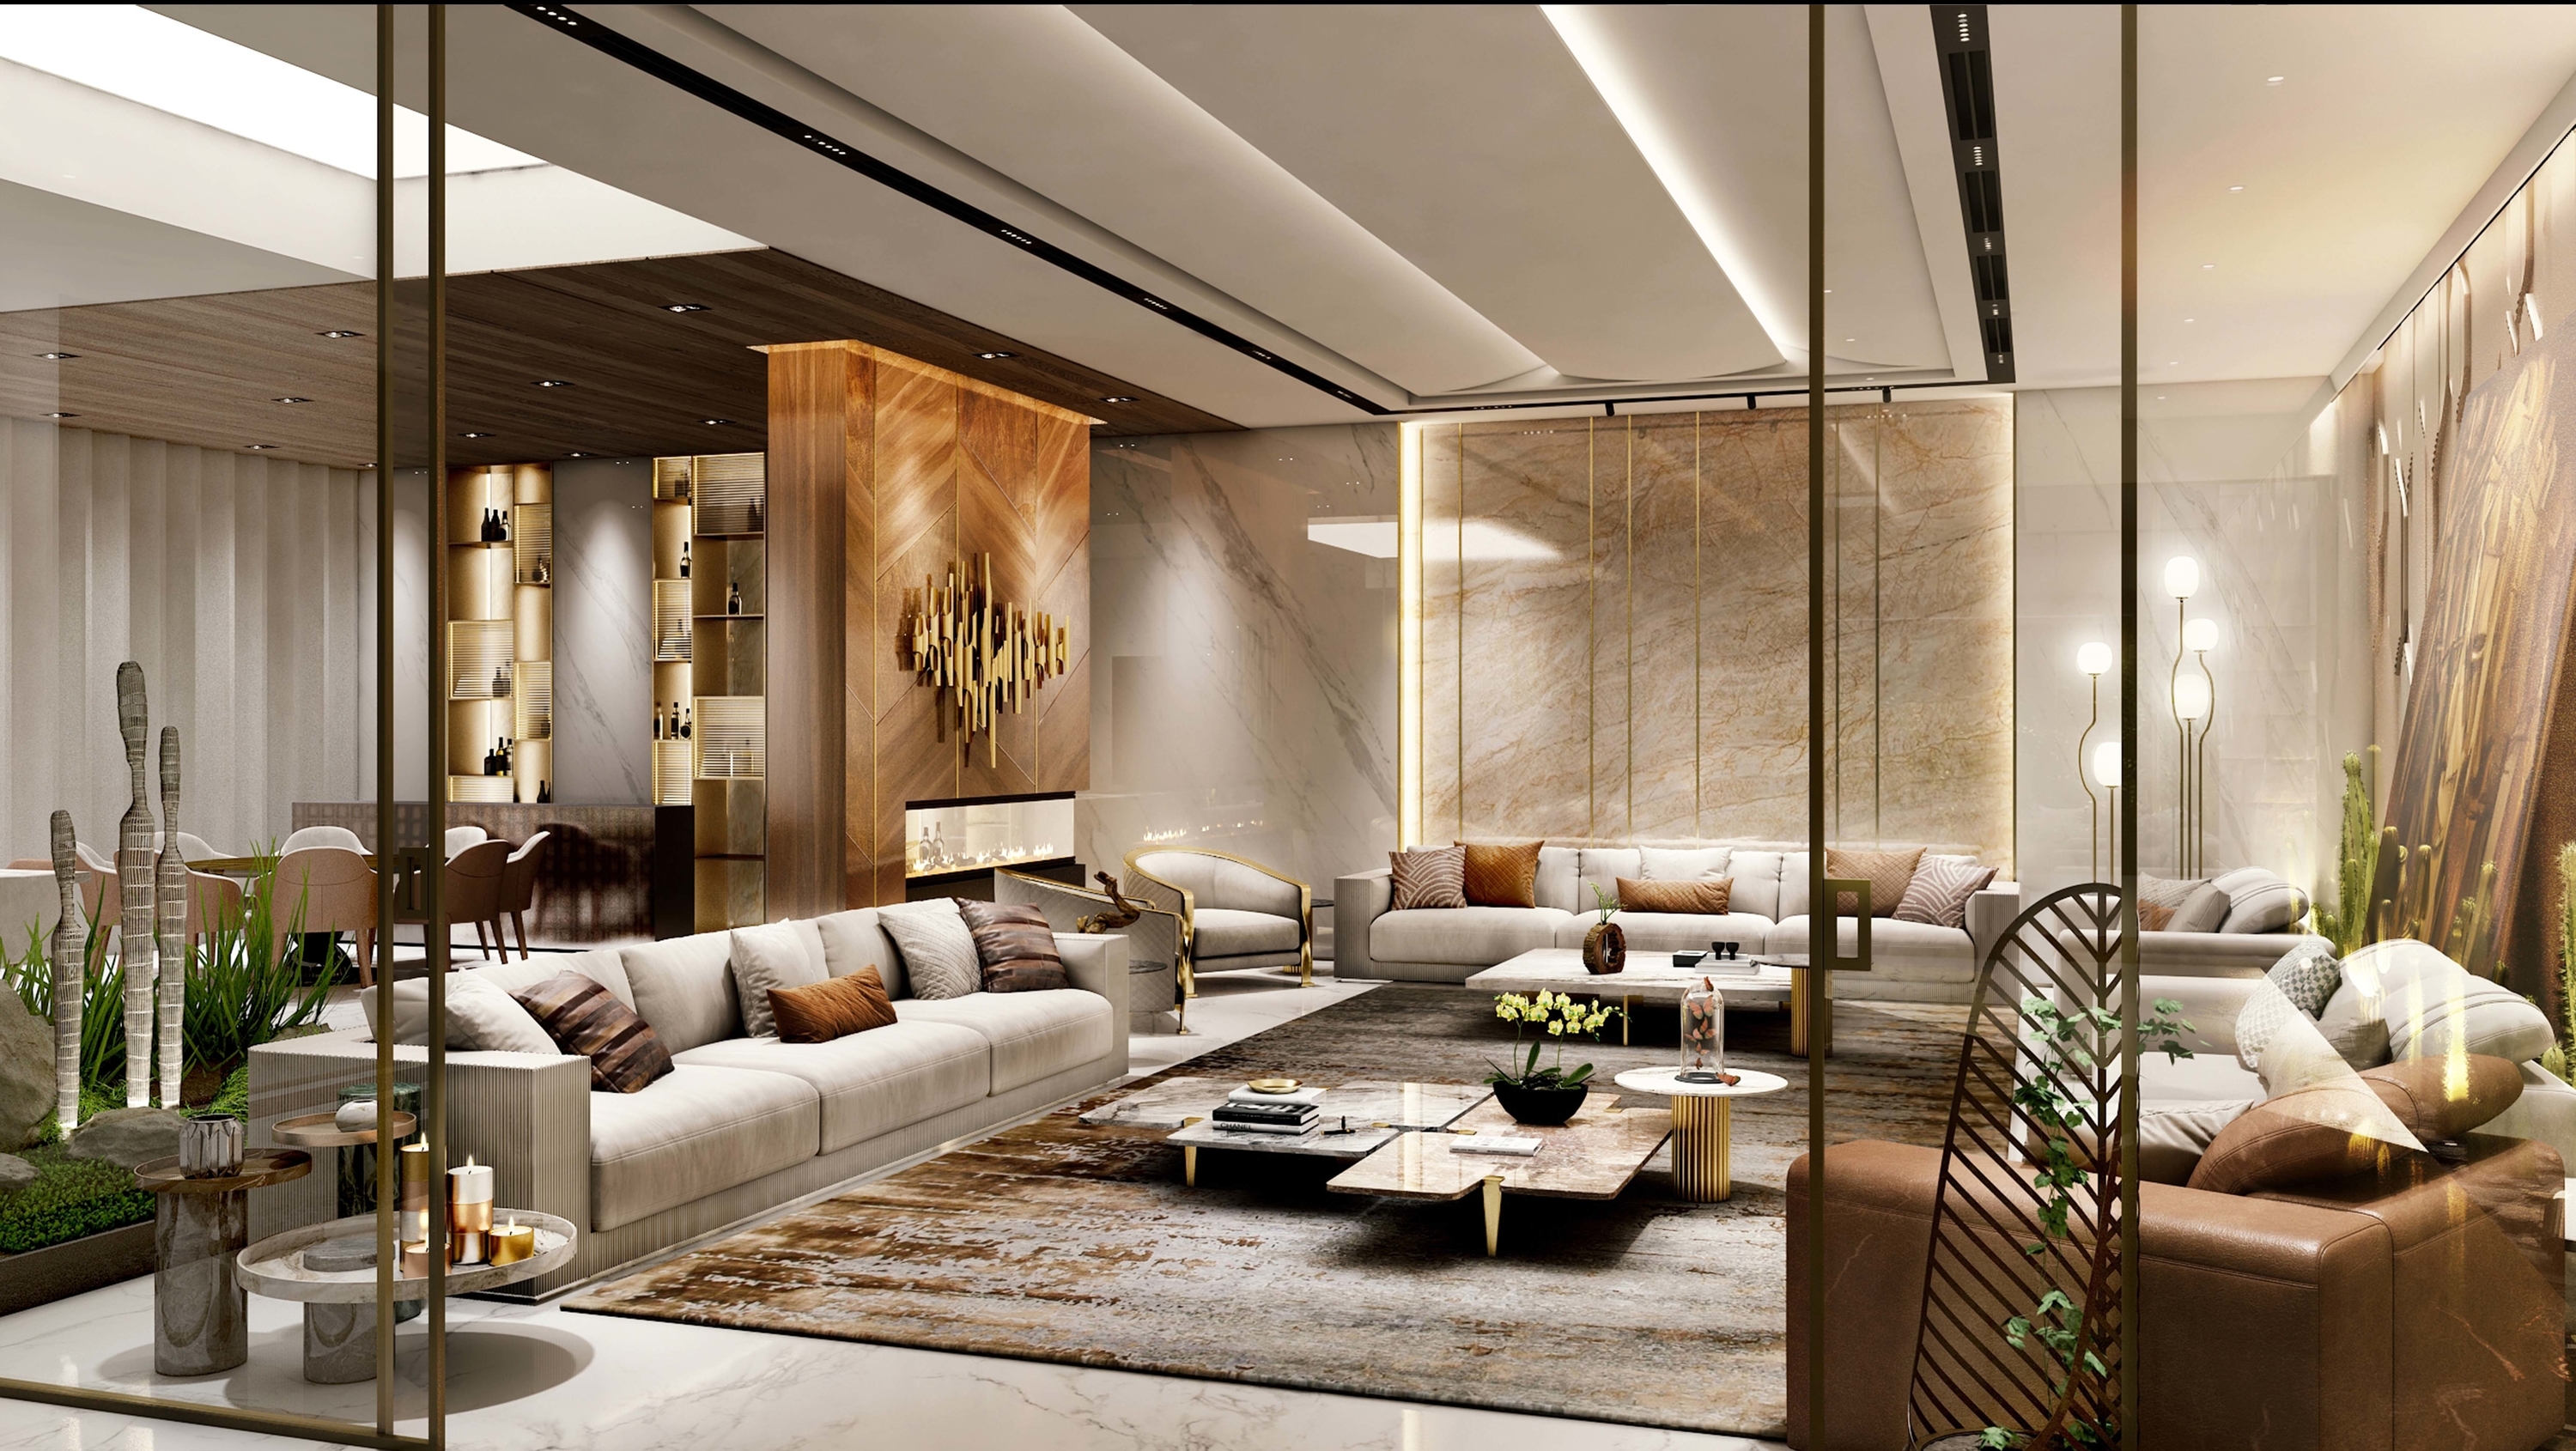 42mm Architecture Unveils Luxurious, Pictures Of Luxury Living Rooms